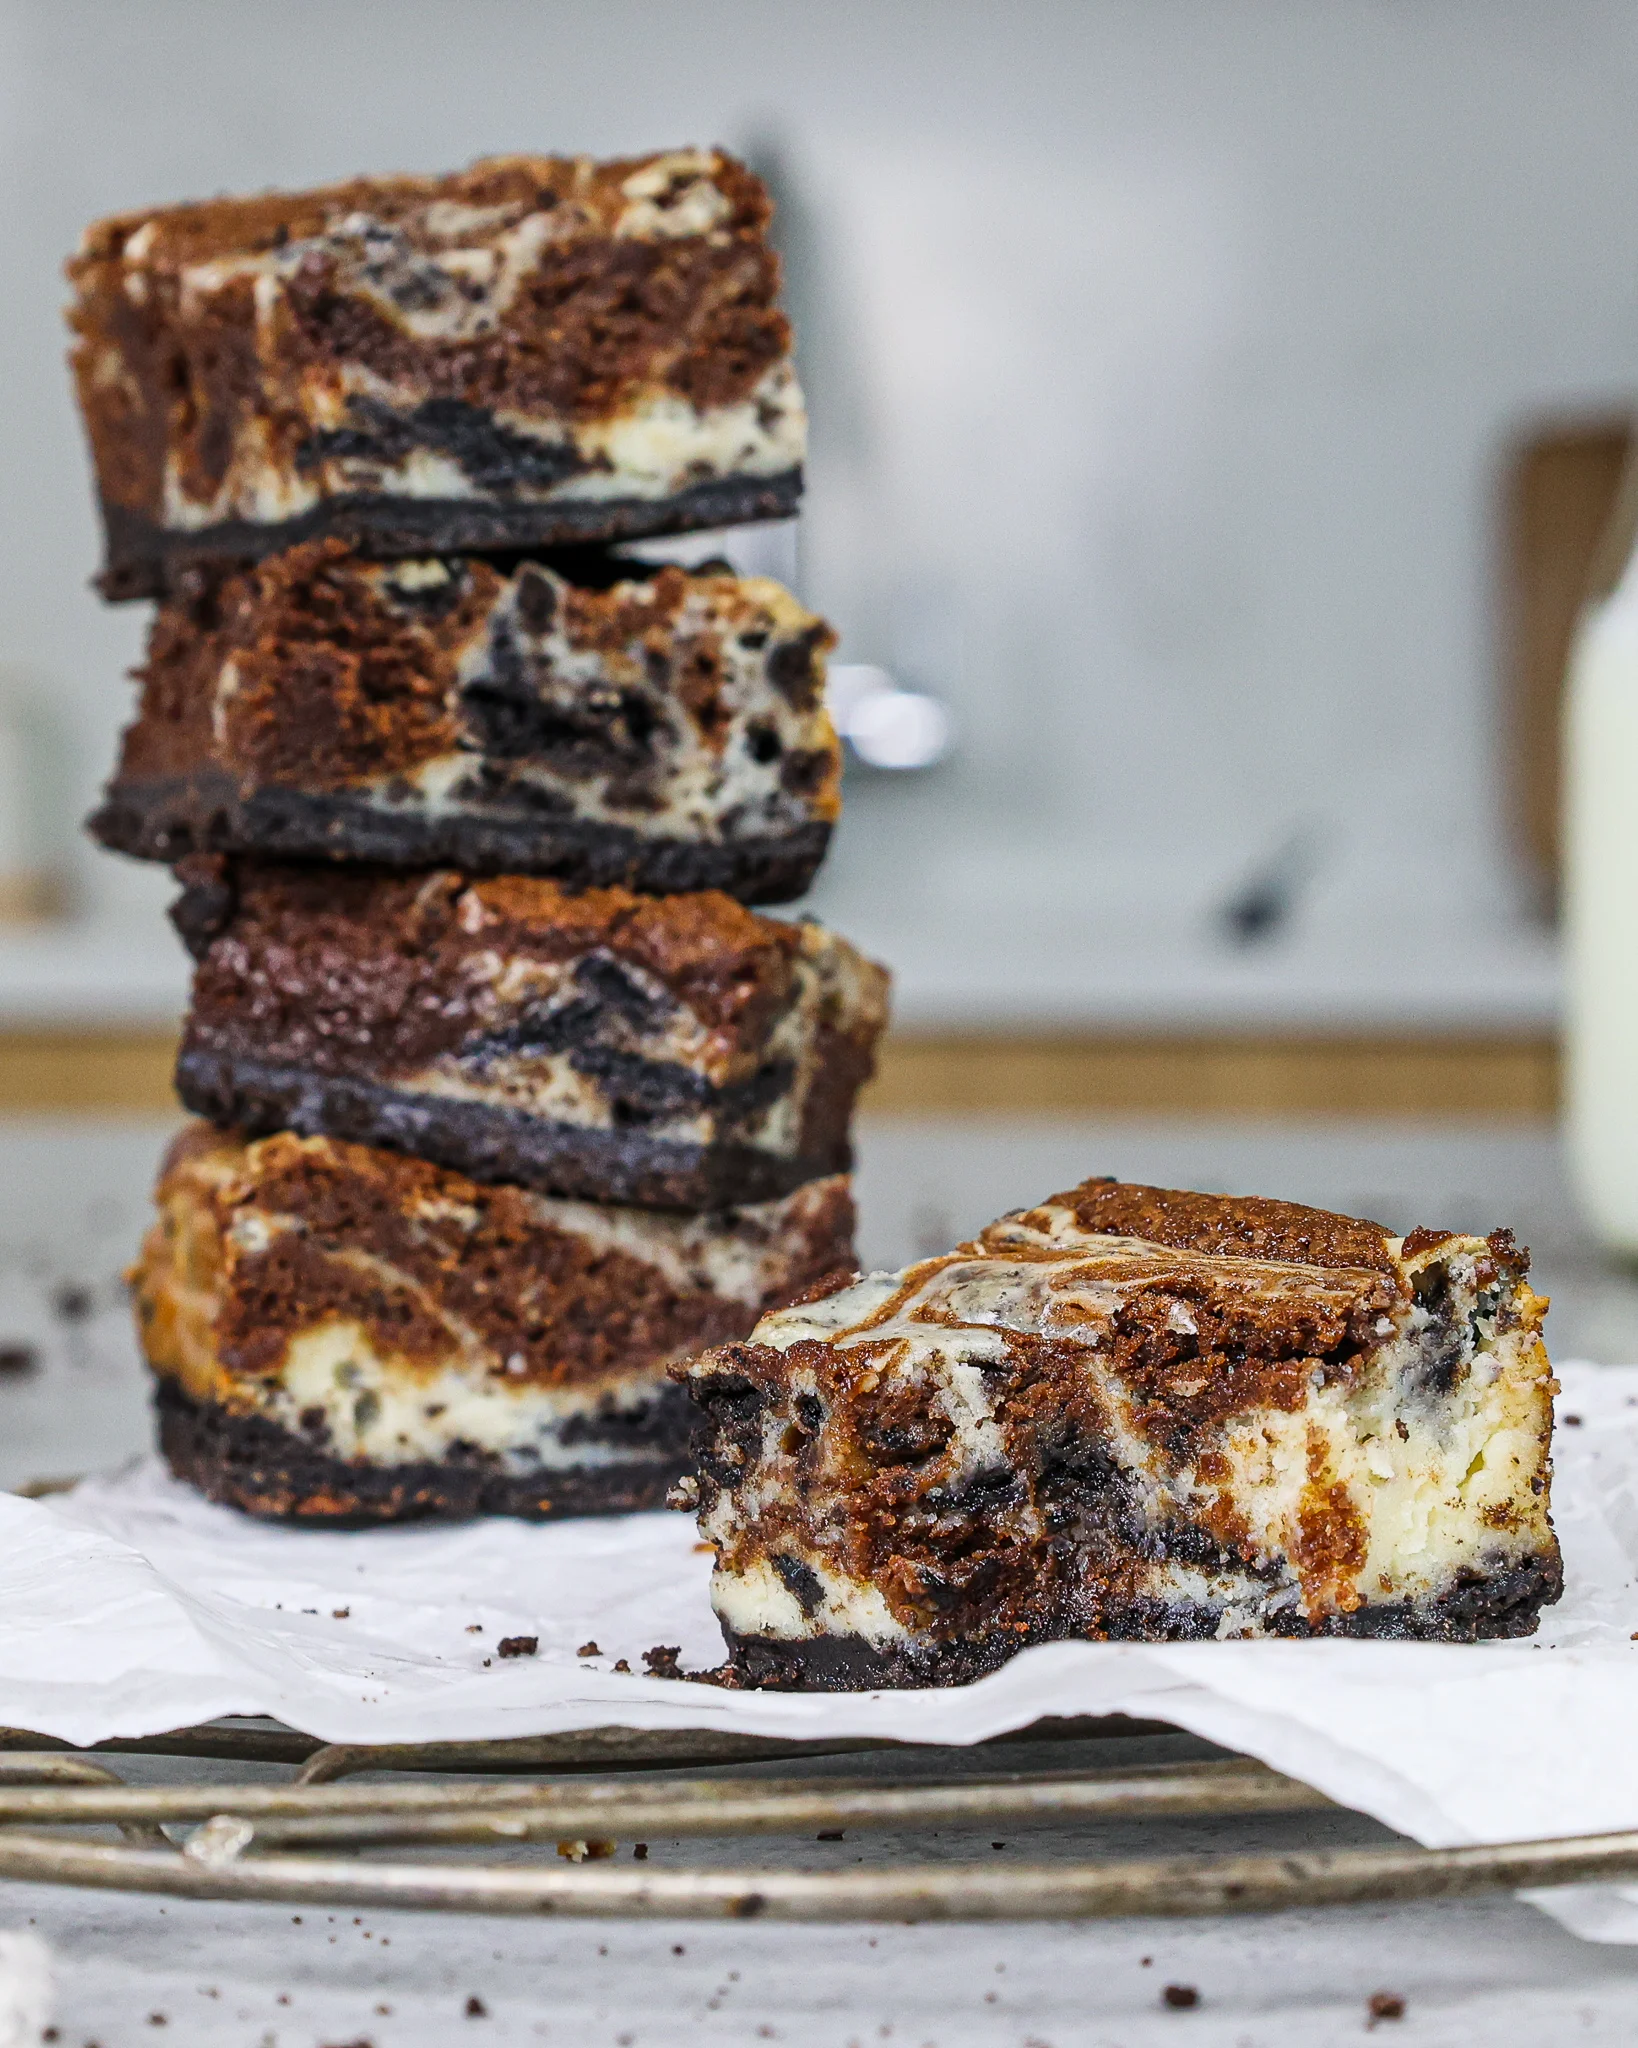 image of an oreo cheesecake brownie that's been bitten into to show it's swirls of chocolatey brownie and oreo cheesecake